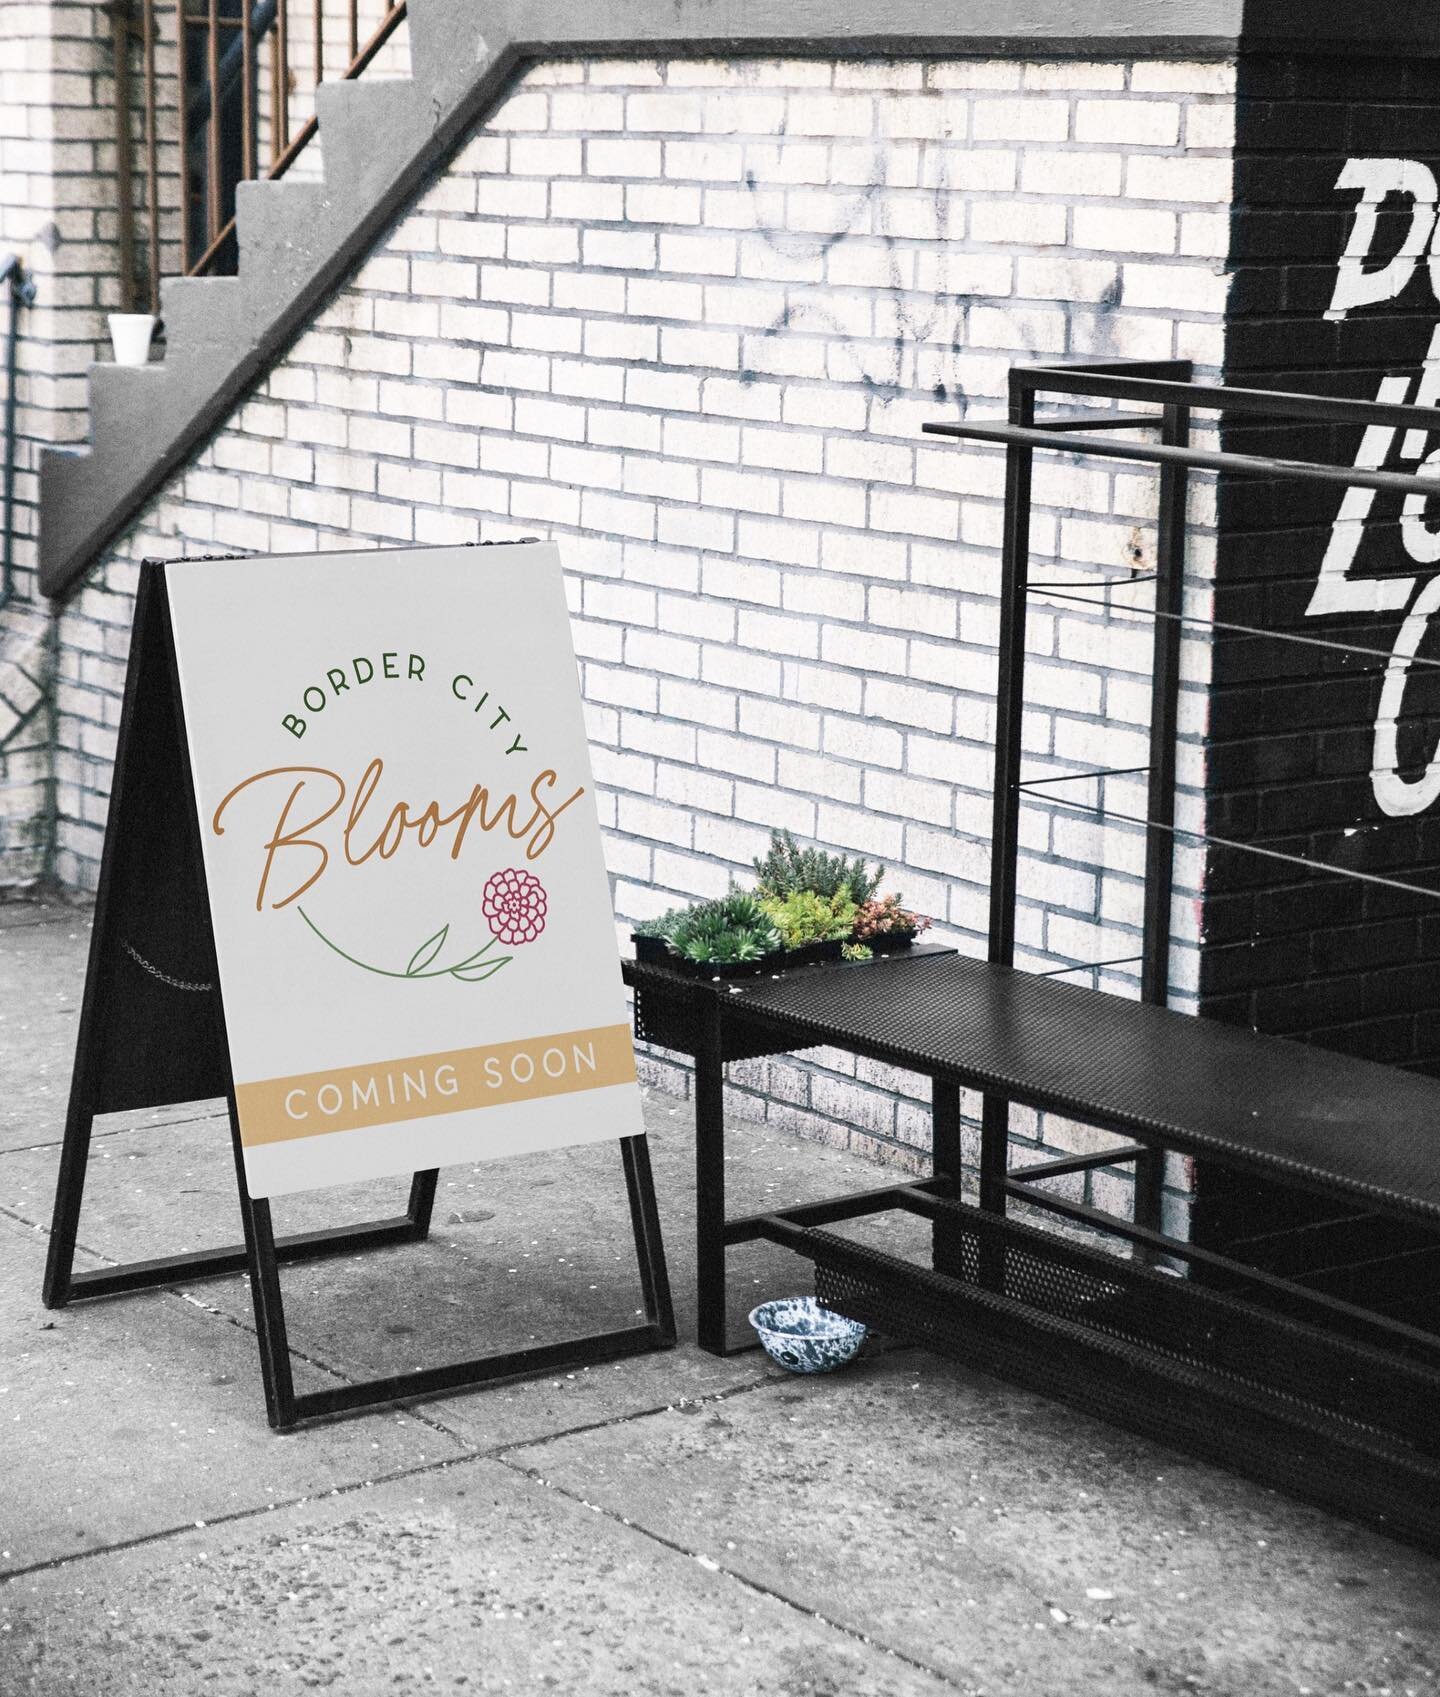 What better time to share the completed brand suite for @bordercityblooms&hellip;. - Jess and TJ just launched a giveaway of a beautiful bouquet of their brand new blooms! Be sure to check out @bordercityblooms to enter! 

Love this little urban mock